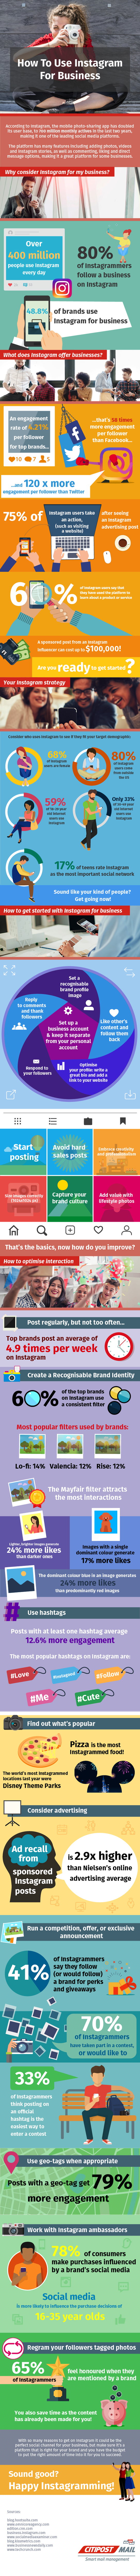 Instagram-for-Business-Infographic